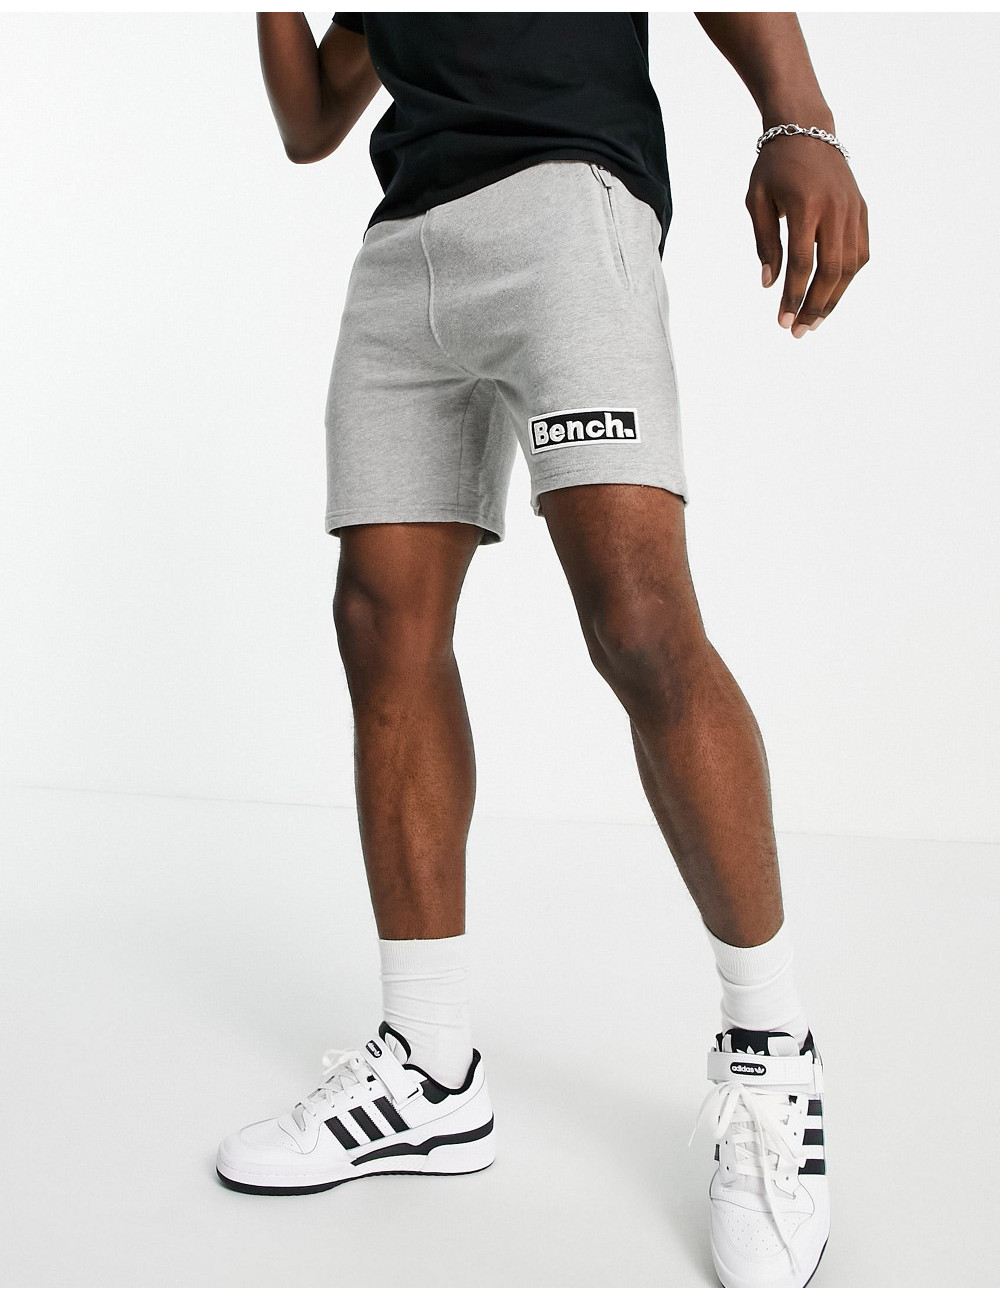 Bench jersey shorts in grey